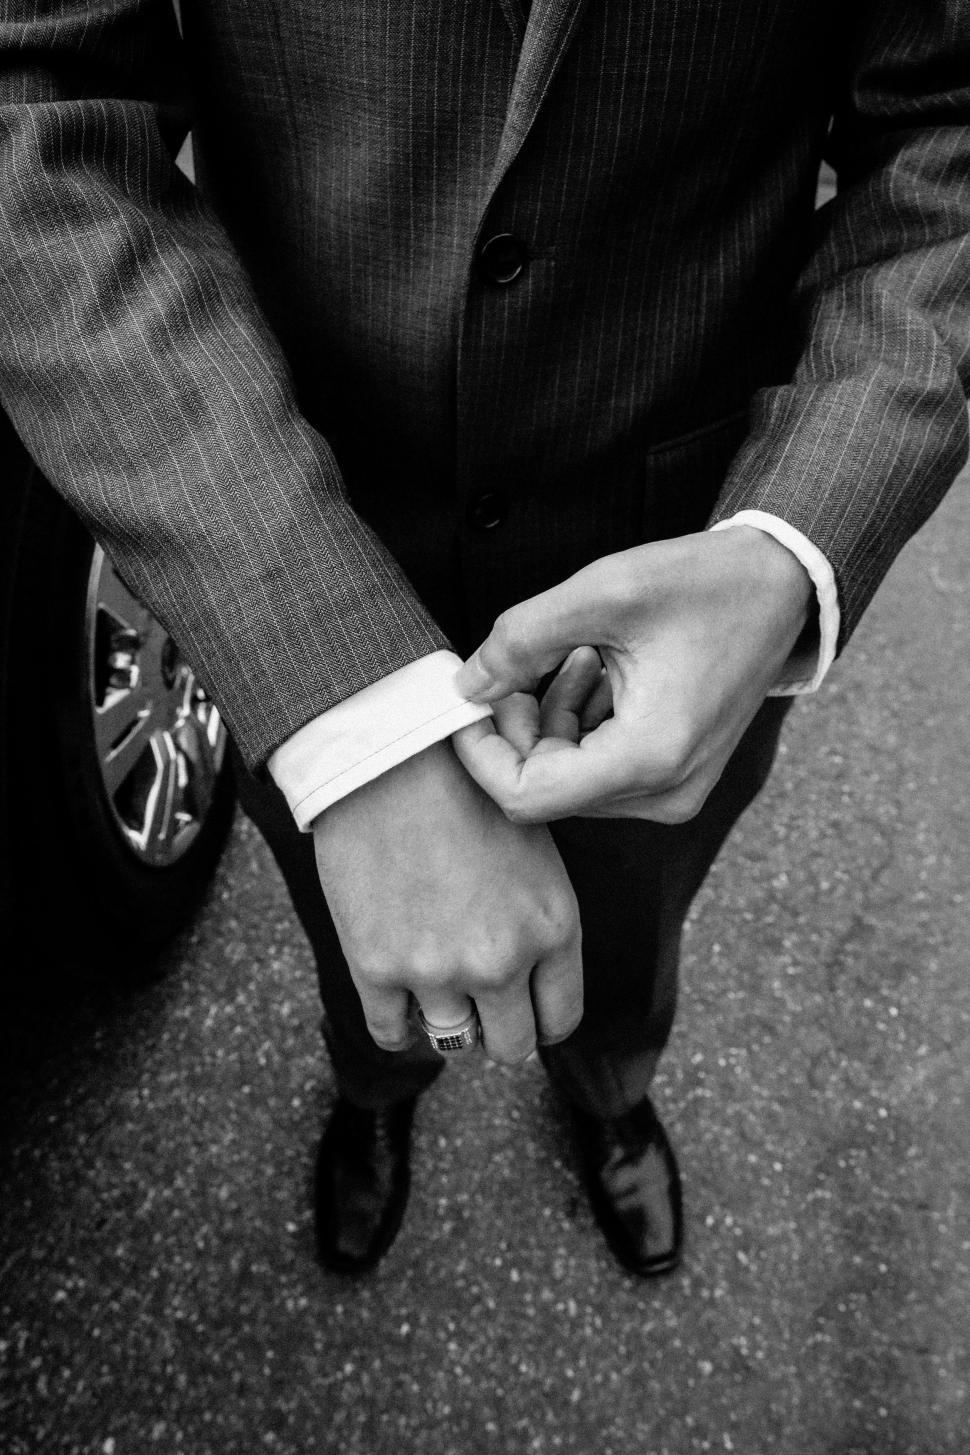 Free Image of Unrecognizable Man in Suit and Trousers - B&W 